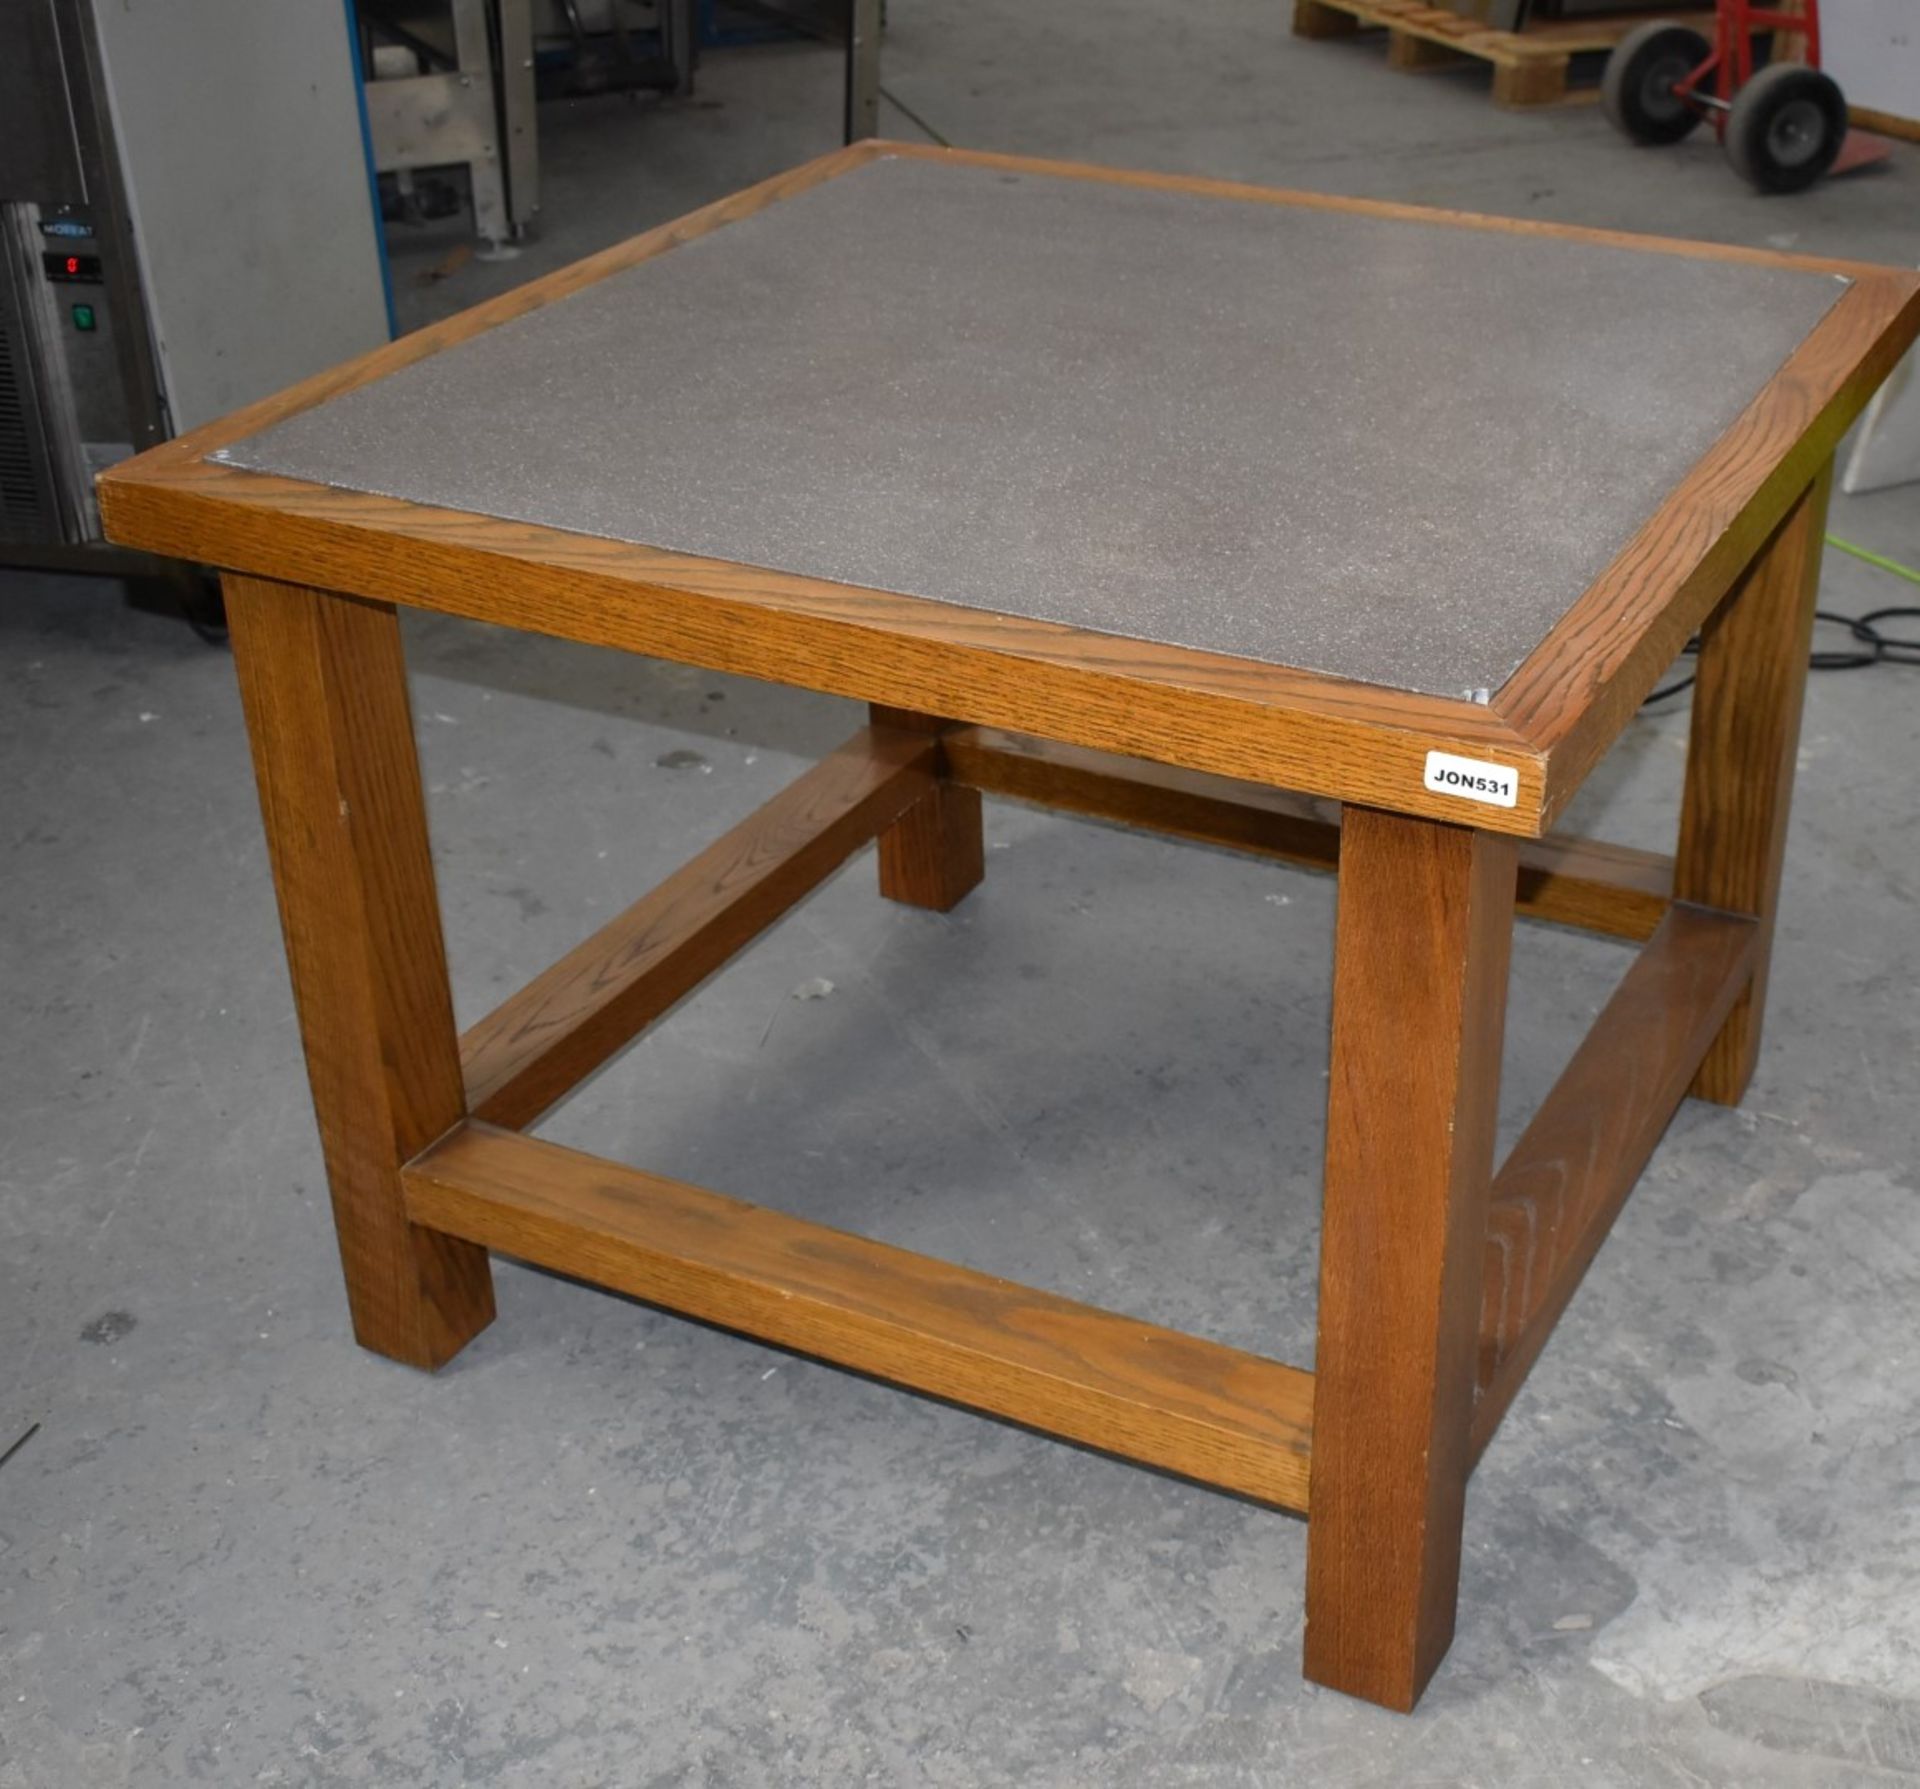 1 x Solid Oak Table With a Stone Insert Top - H77 x W100 x D100 cms - Image 3 of 9